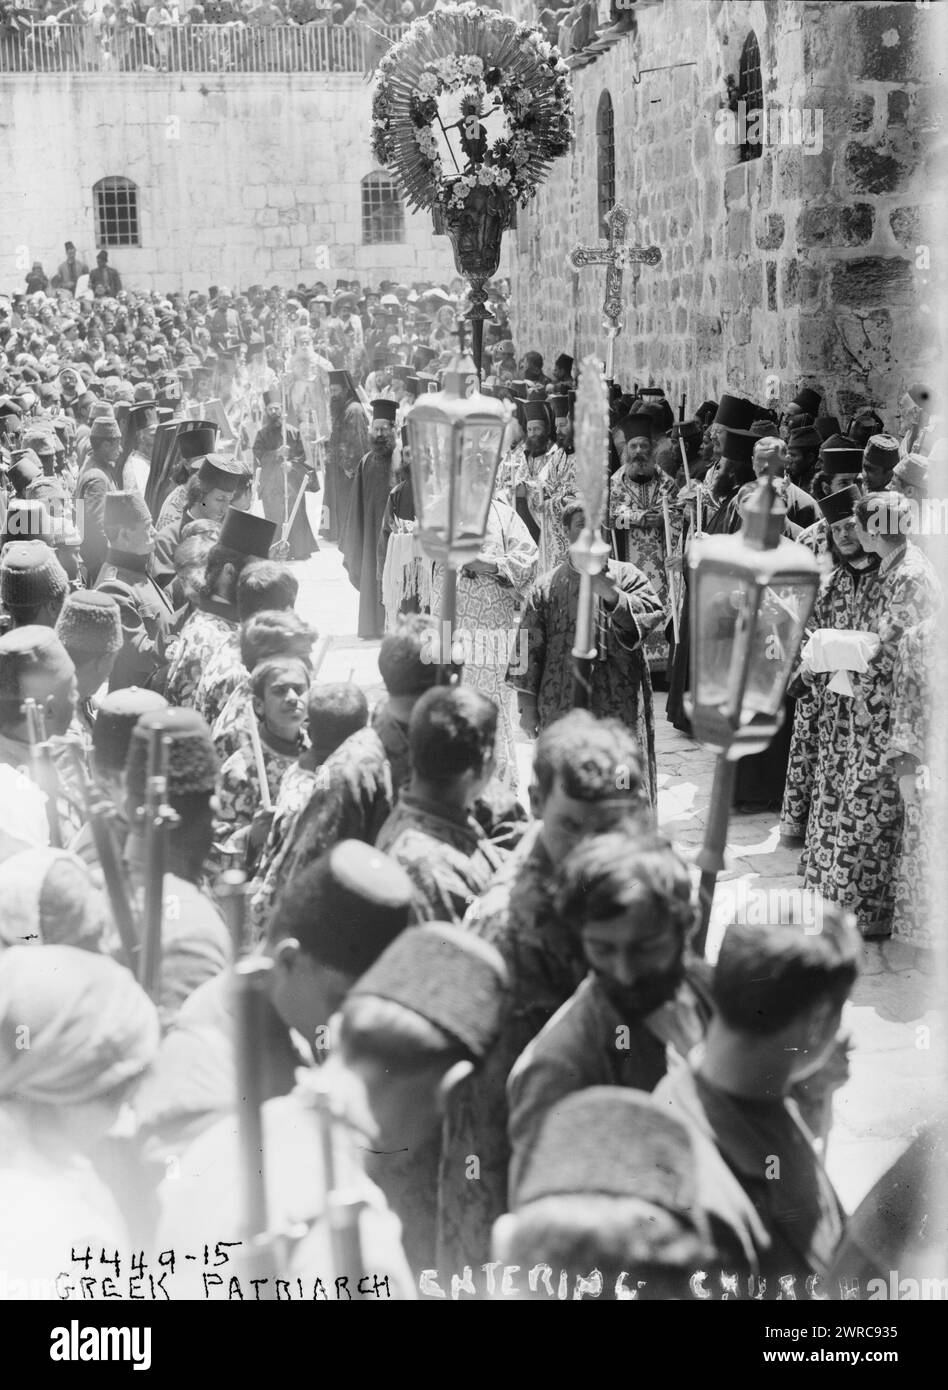 Greek patriarch entering church, Photograph shows a religious procession with the Greek Orthodox Patriarch of Jerusalem going into the Church of the Holy Sepulchre. People in procession hold cross and a monstrance., between ca. 1915 and ca. 1920, Glass negatives, 1 negative: glass Stock Photo